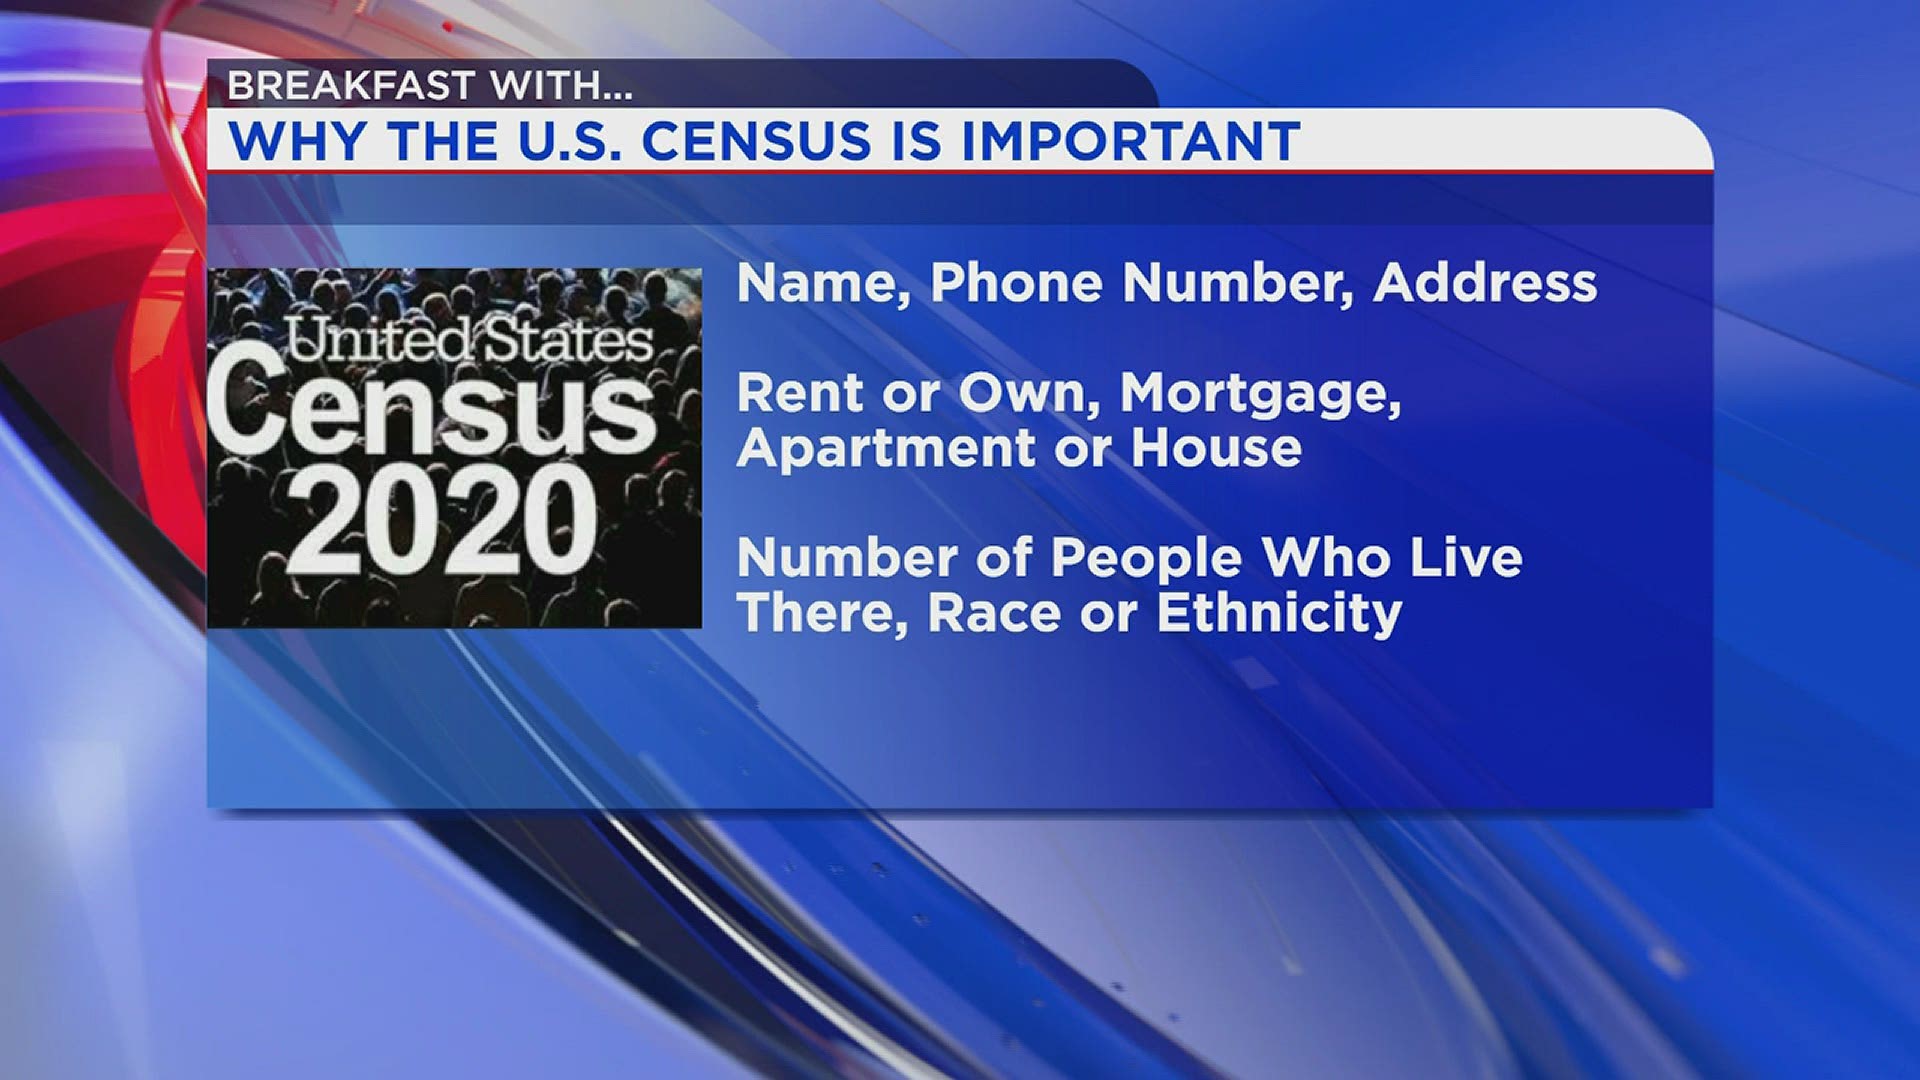 News 8's Jonathan Ketz explains why it's so important to be counted in the U.S. Census